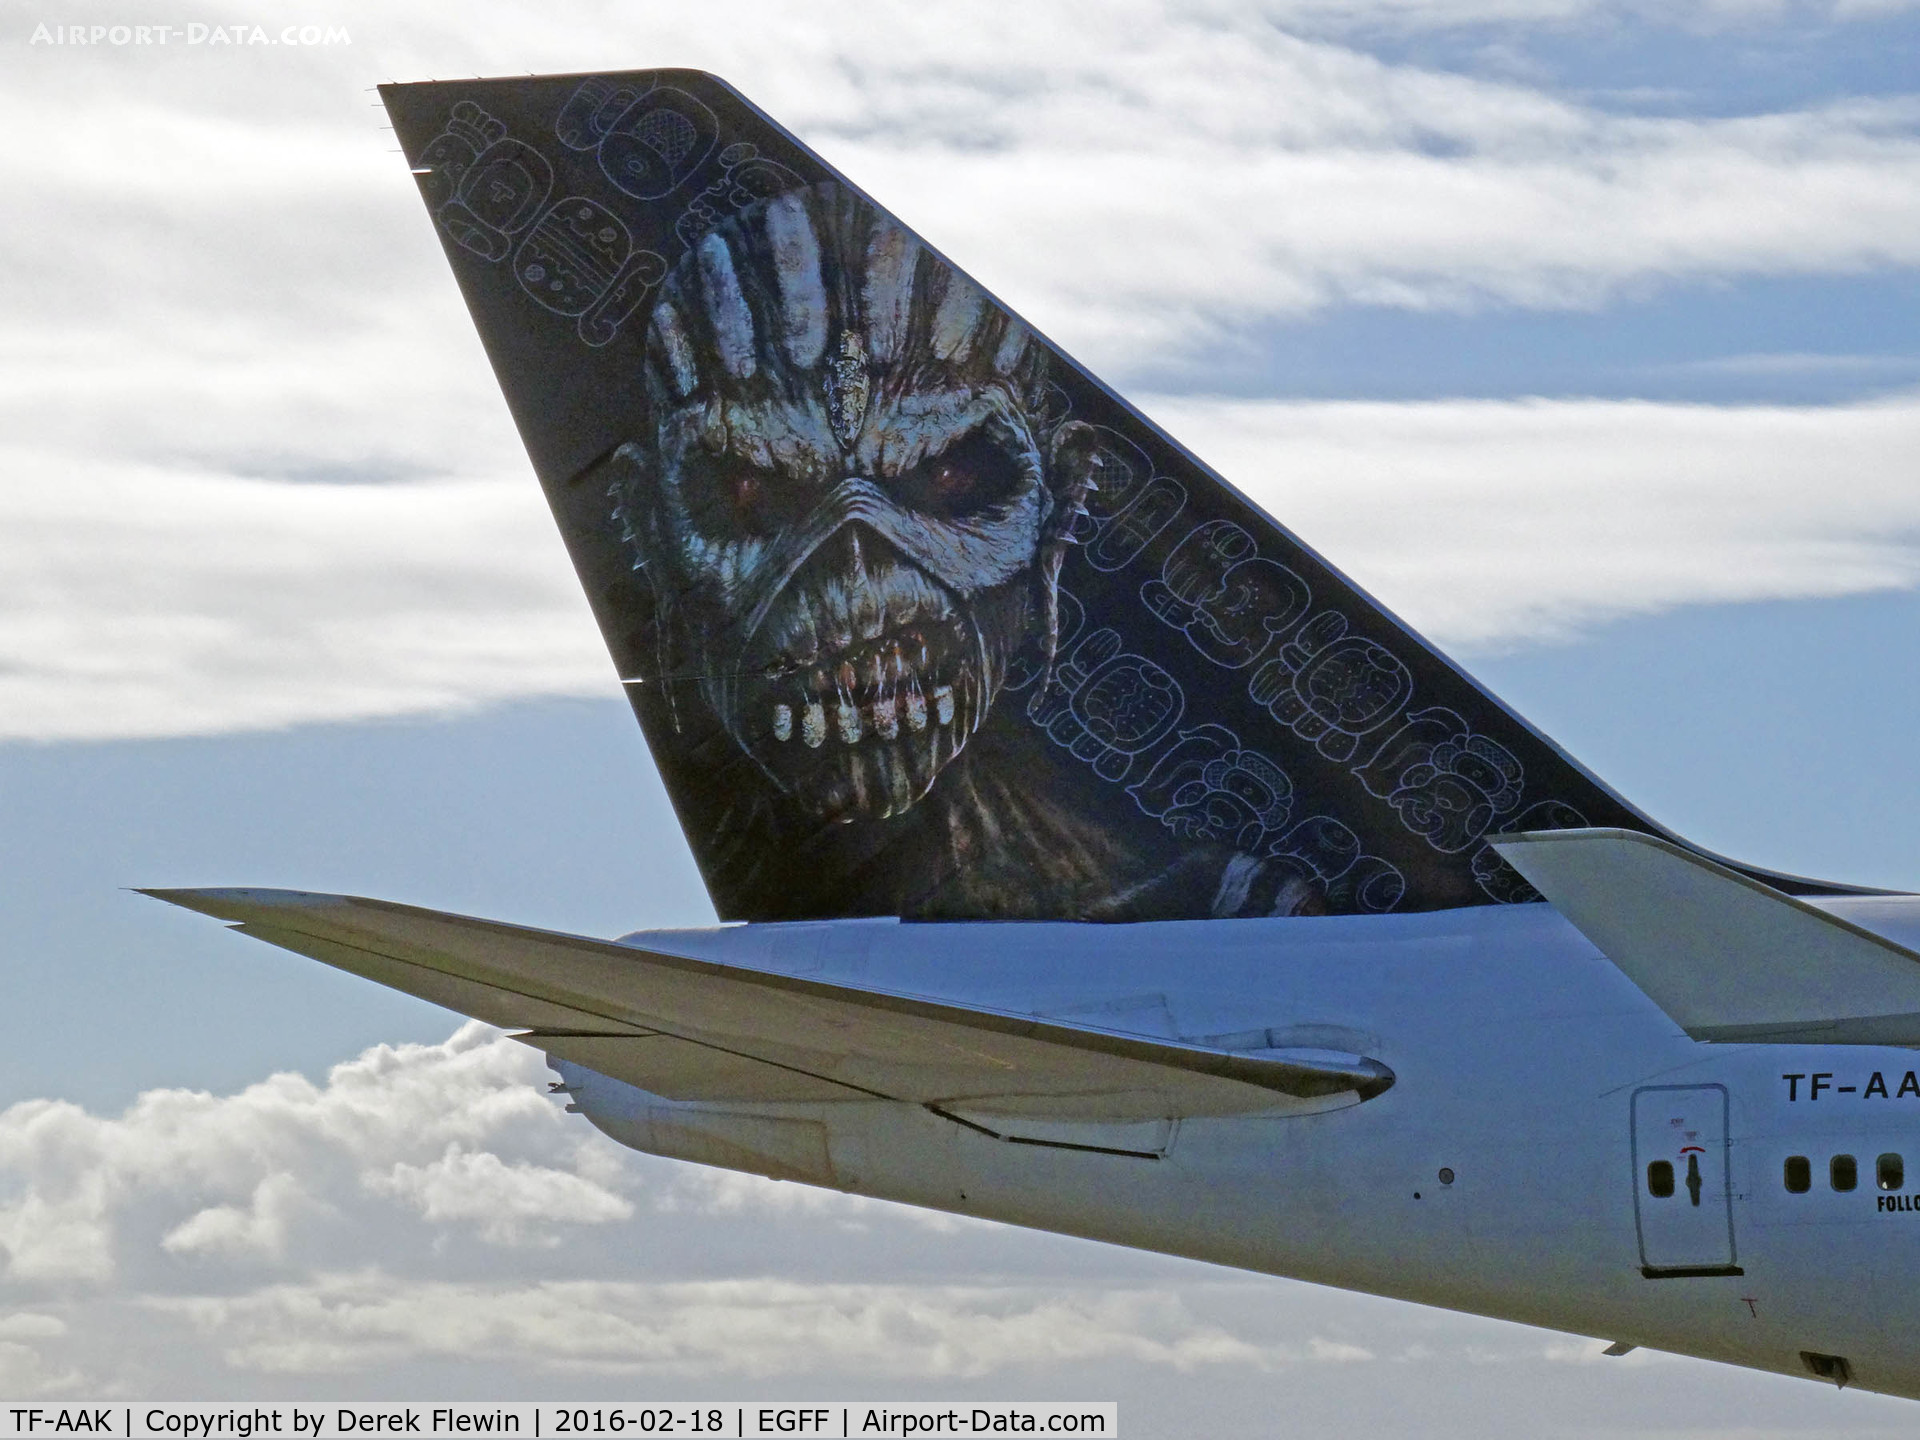 TF-AAK, 2003 Boeing 747-428 C/N 32868, 747-428, Air Atlanta Icelandic, Iron Maiden's Ed Force One,previously F-GITH,  tail art.